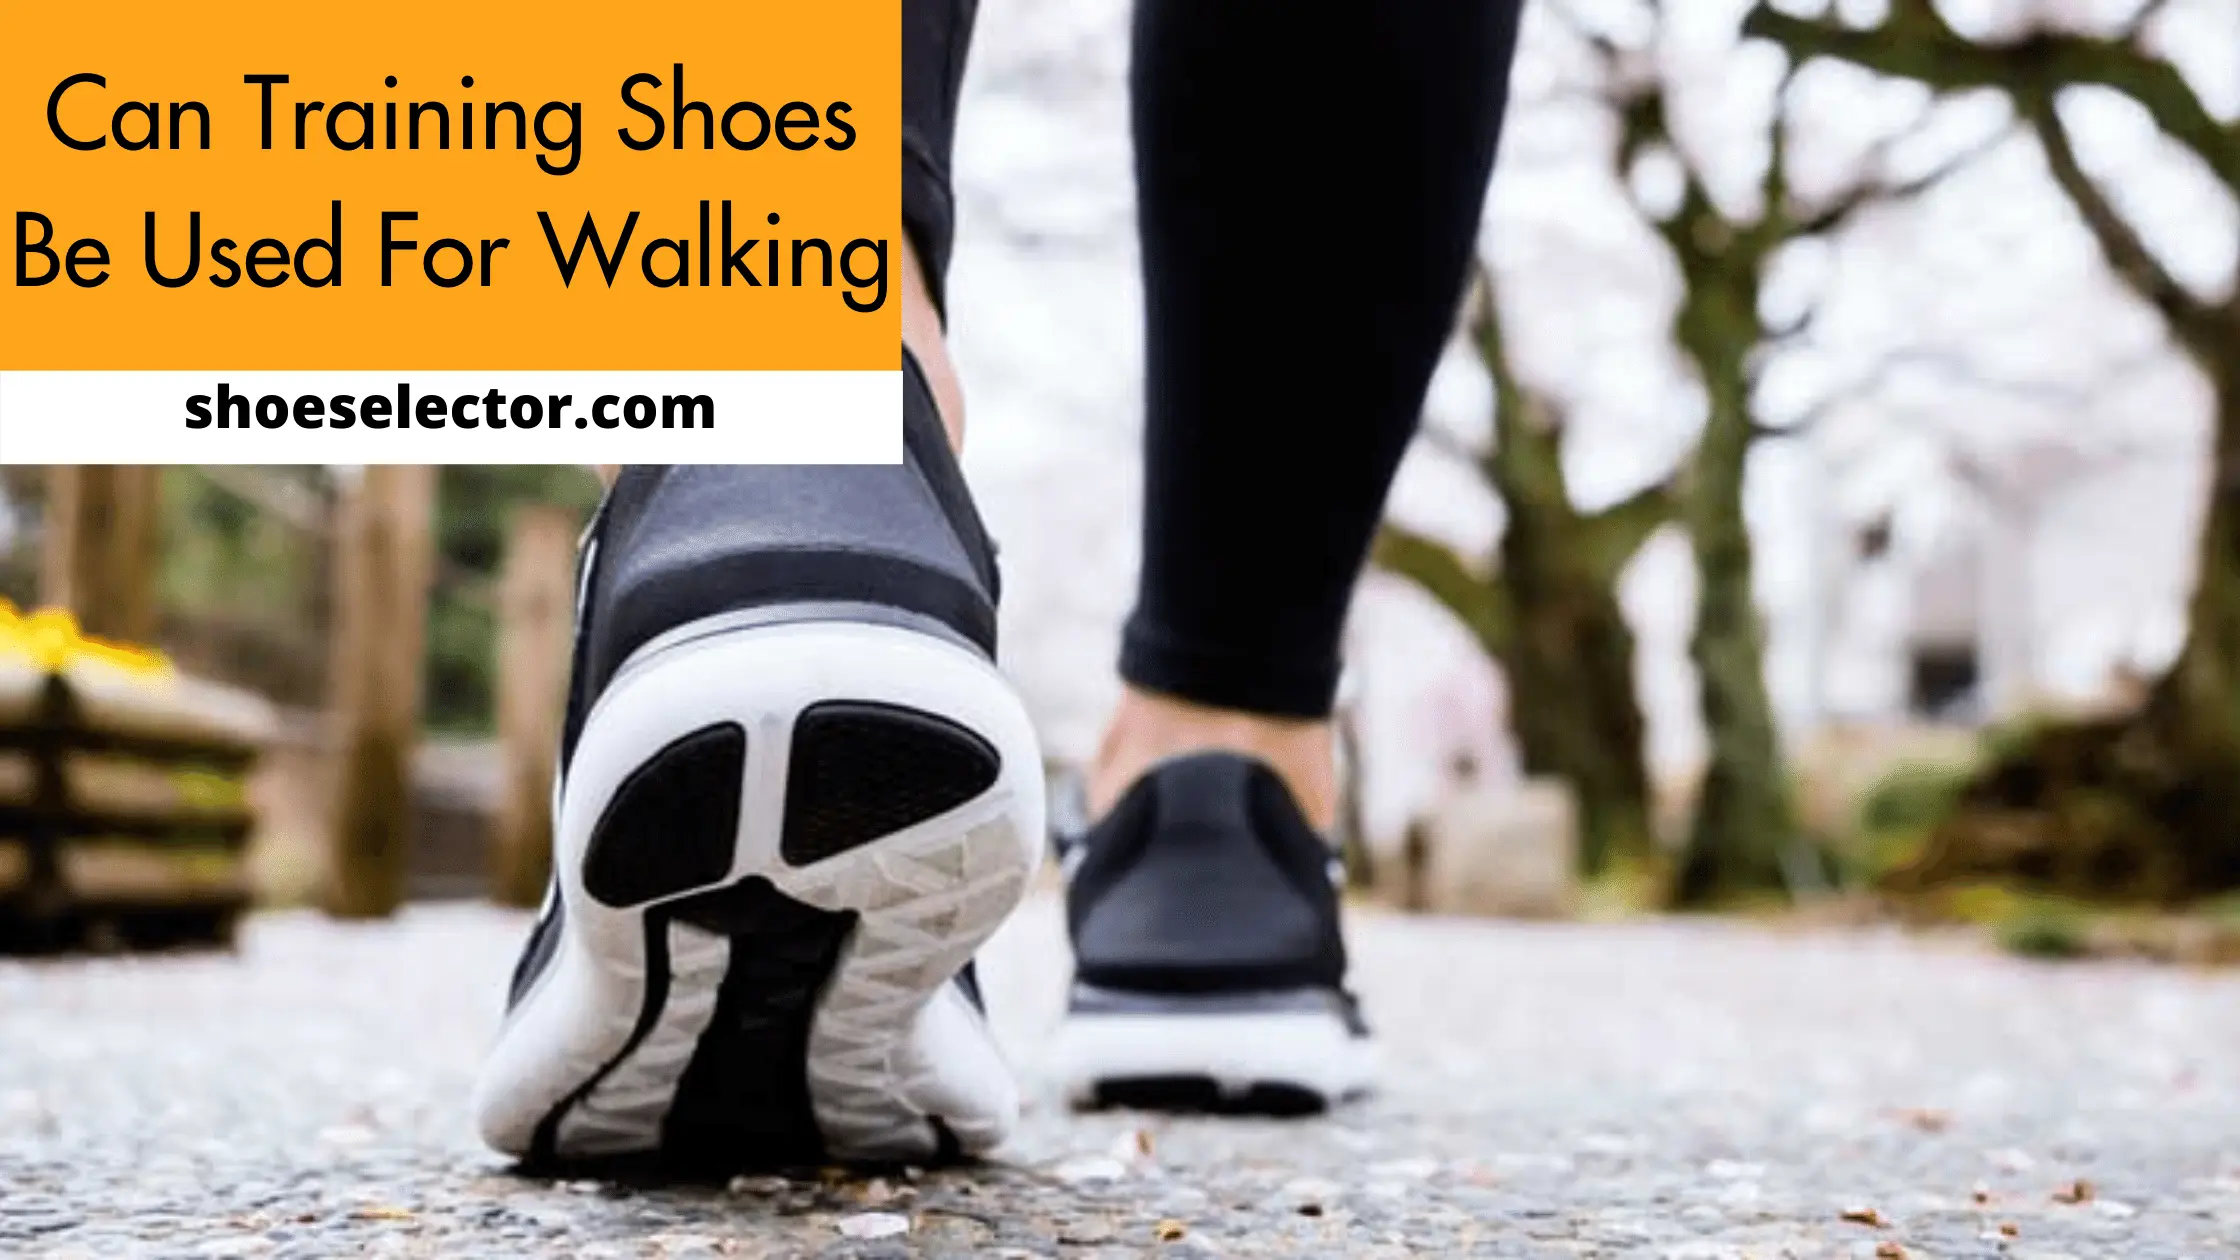 Can Training Shoes Be Used For Walking? | How To Get The Most Out Of Your Shoes